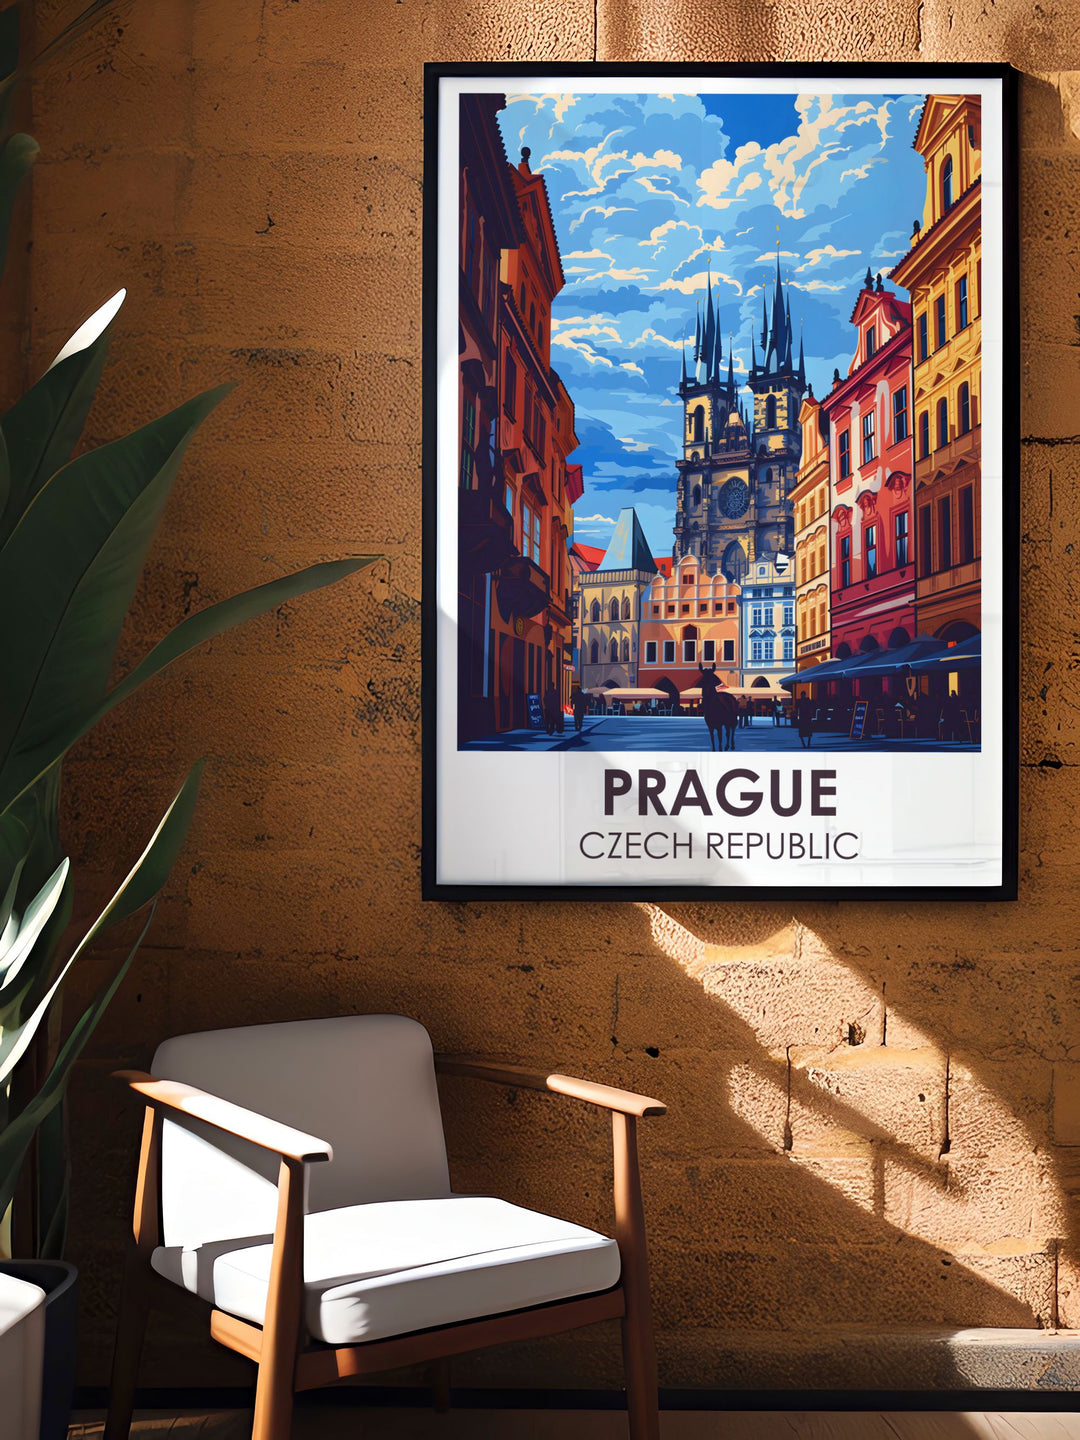 Old Town Square Prints featuring the historic charm of Prague. These Prague Art Prints are perfect for adding a touch of the Czech Republic to your home decor. Ideal for travel enthusiasts and art lovers.